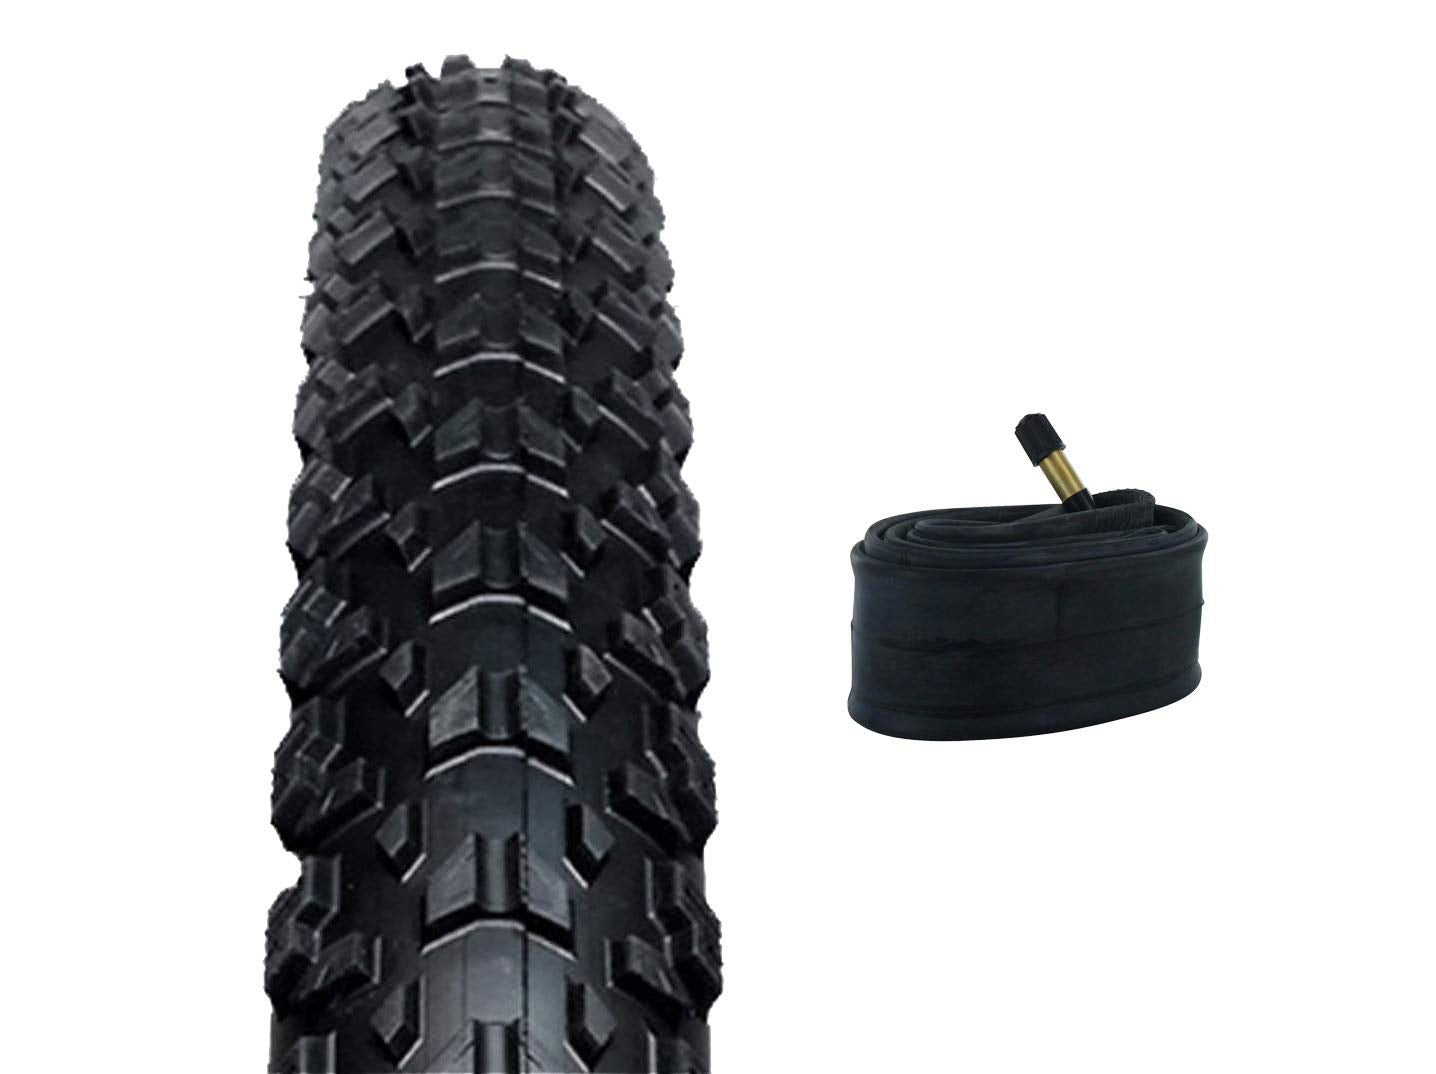 Zol Bundle Pack Z2018 MTB Tires and Tube 26x2.25", Schrader/American 48 MM Valve - Zol Cycling